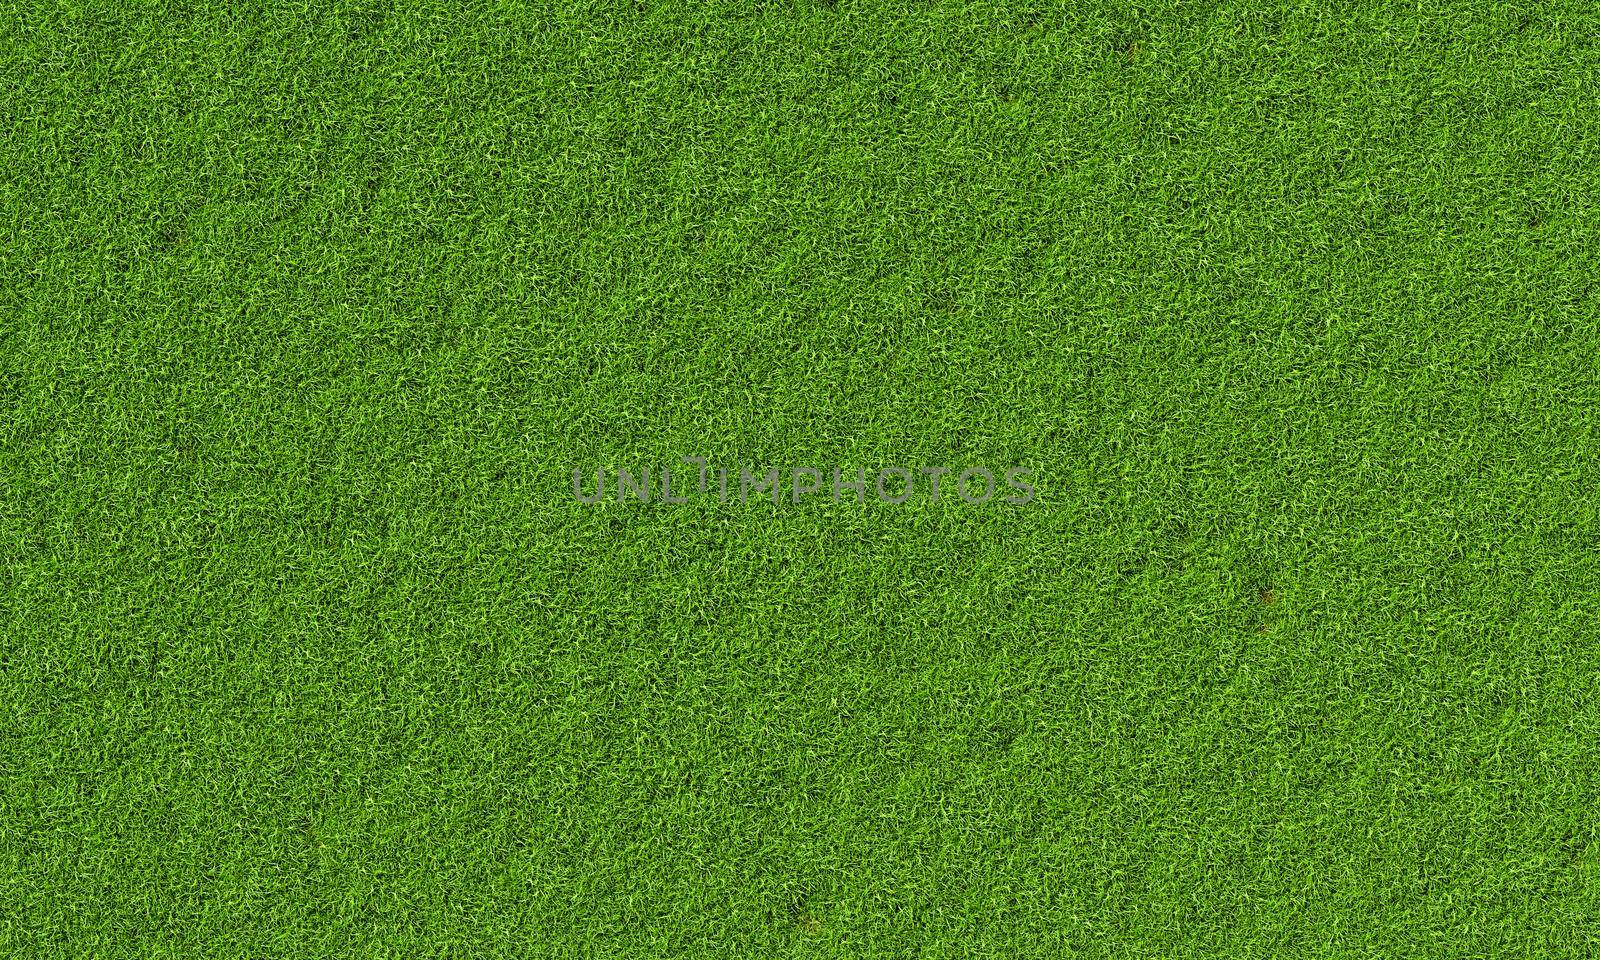 Top view of fresh green grassy background. Nature and wallpaper concept. 3D illustration rendering